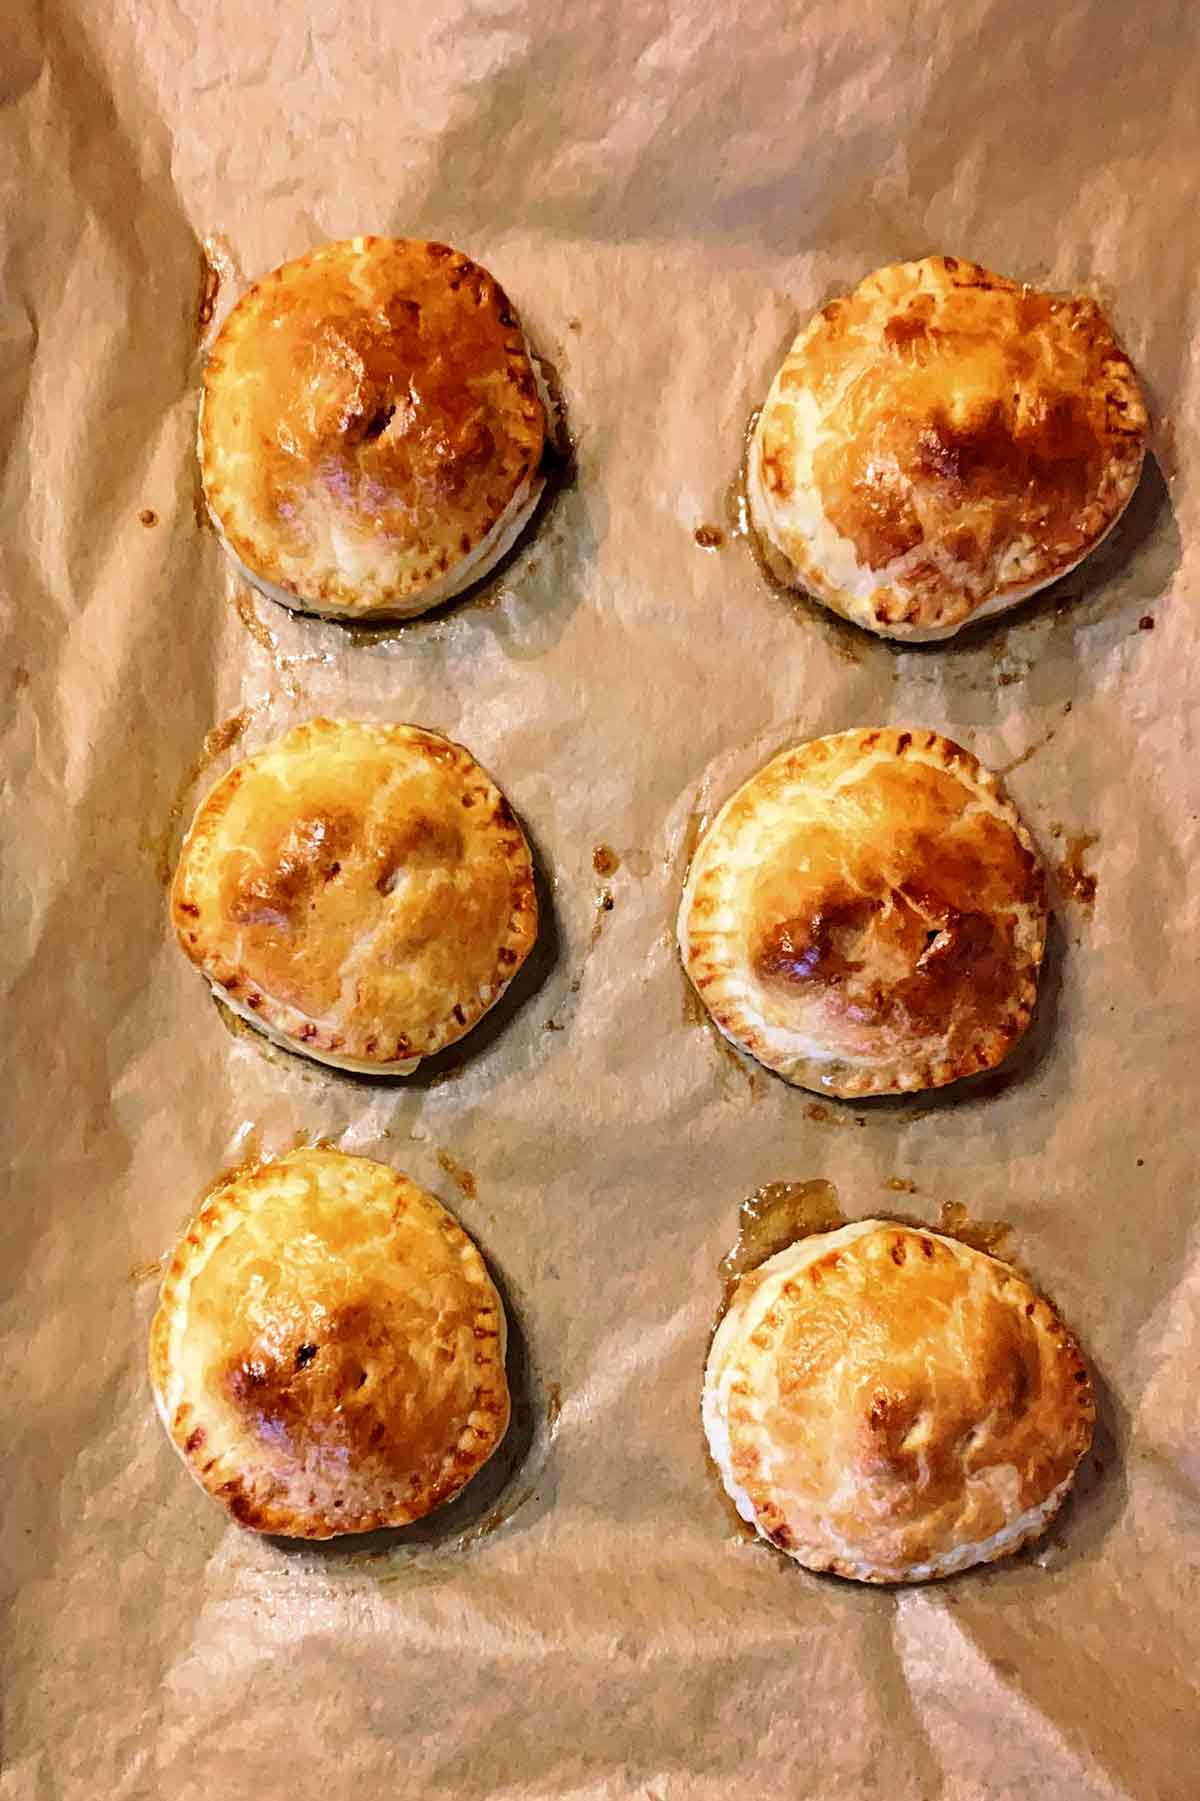 Six cooked mince pies.